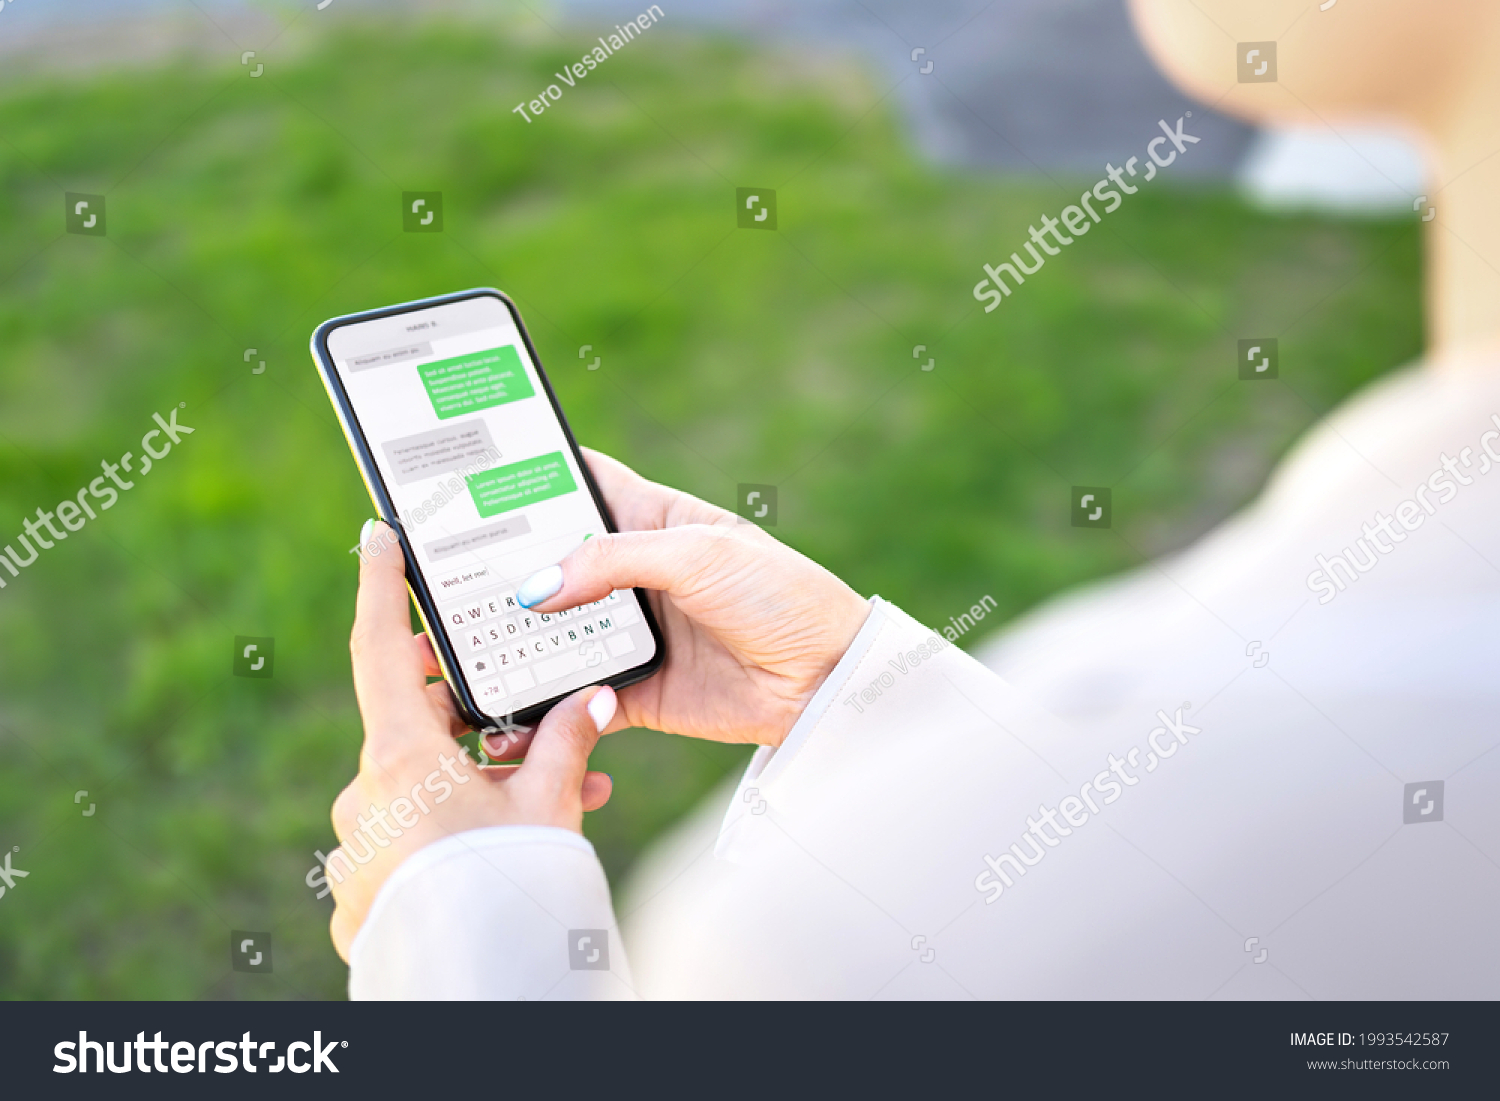 Woman texting with phone outdoors. Text message with smartphone. Digital sms and instant messaging chat. Person using cellphone in park outside in summer. Conversation with boyfriend or friend. #1993542587